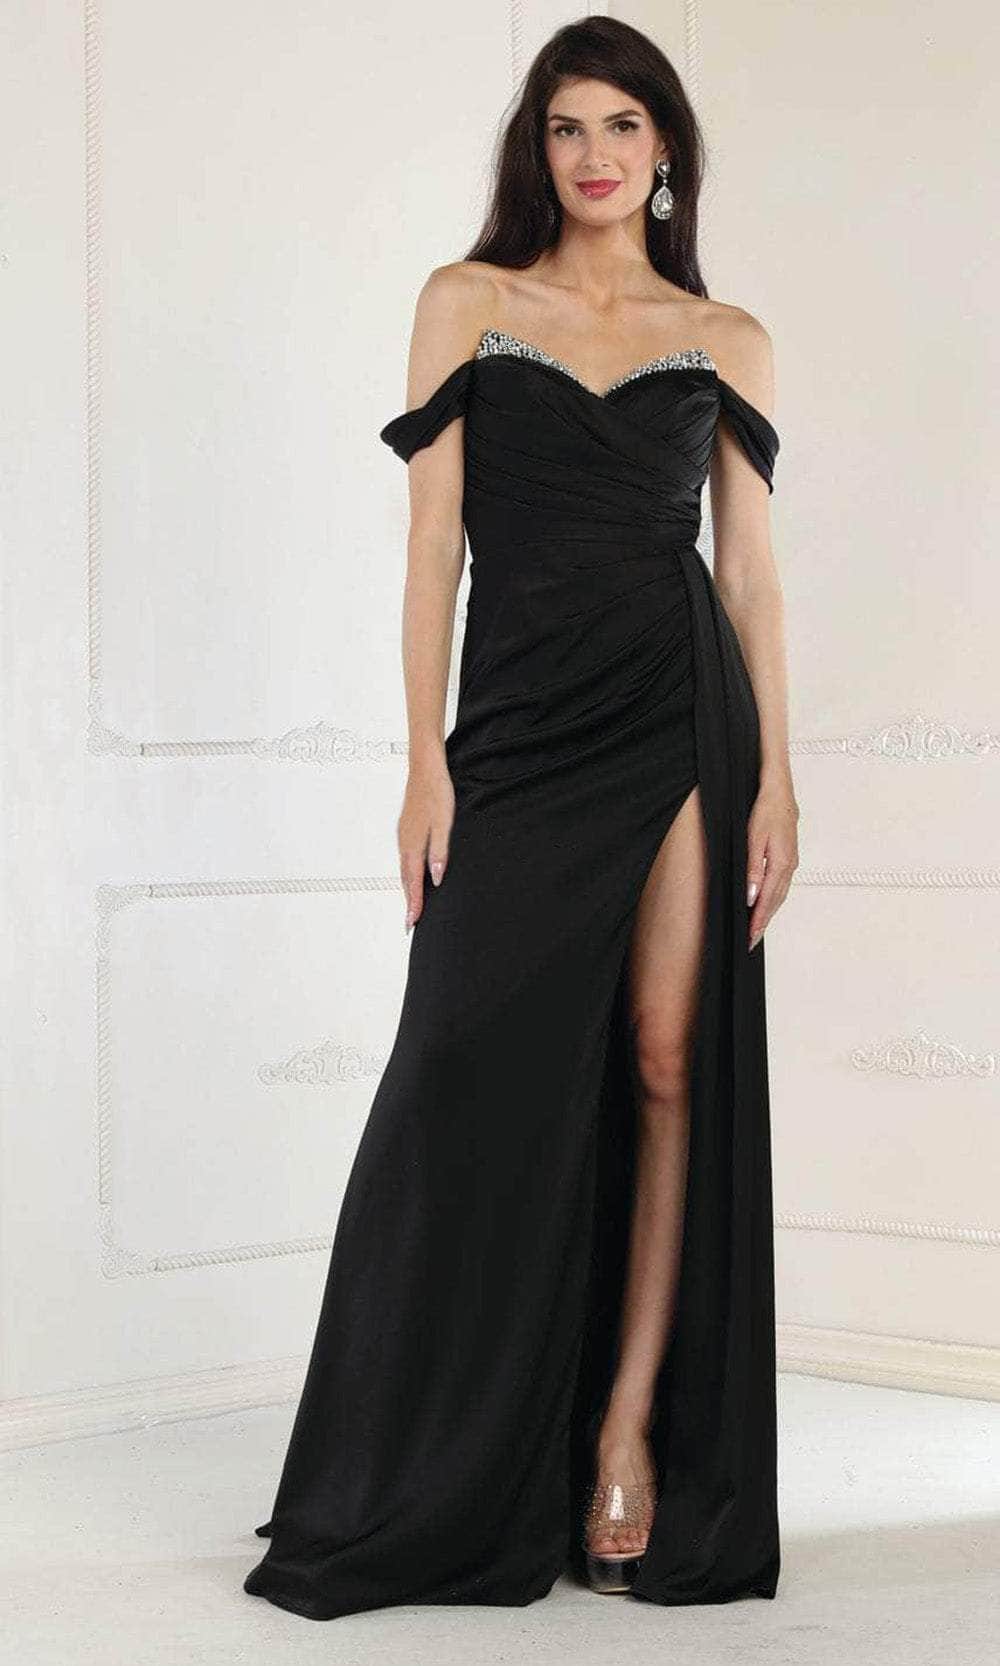 Image of May Queen RQ7971 - Beaded Off-Shoulder Prom Dress